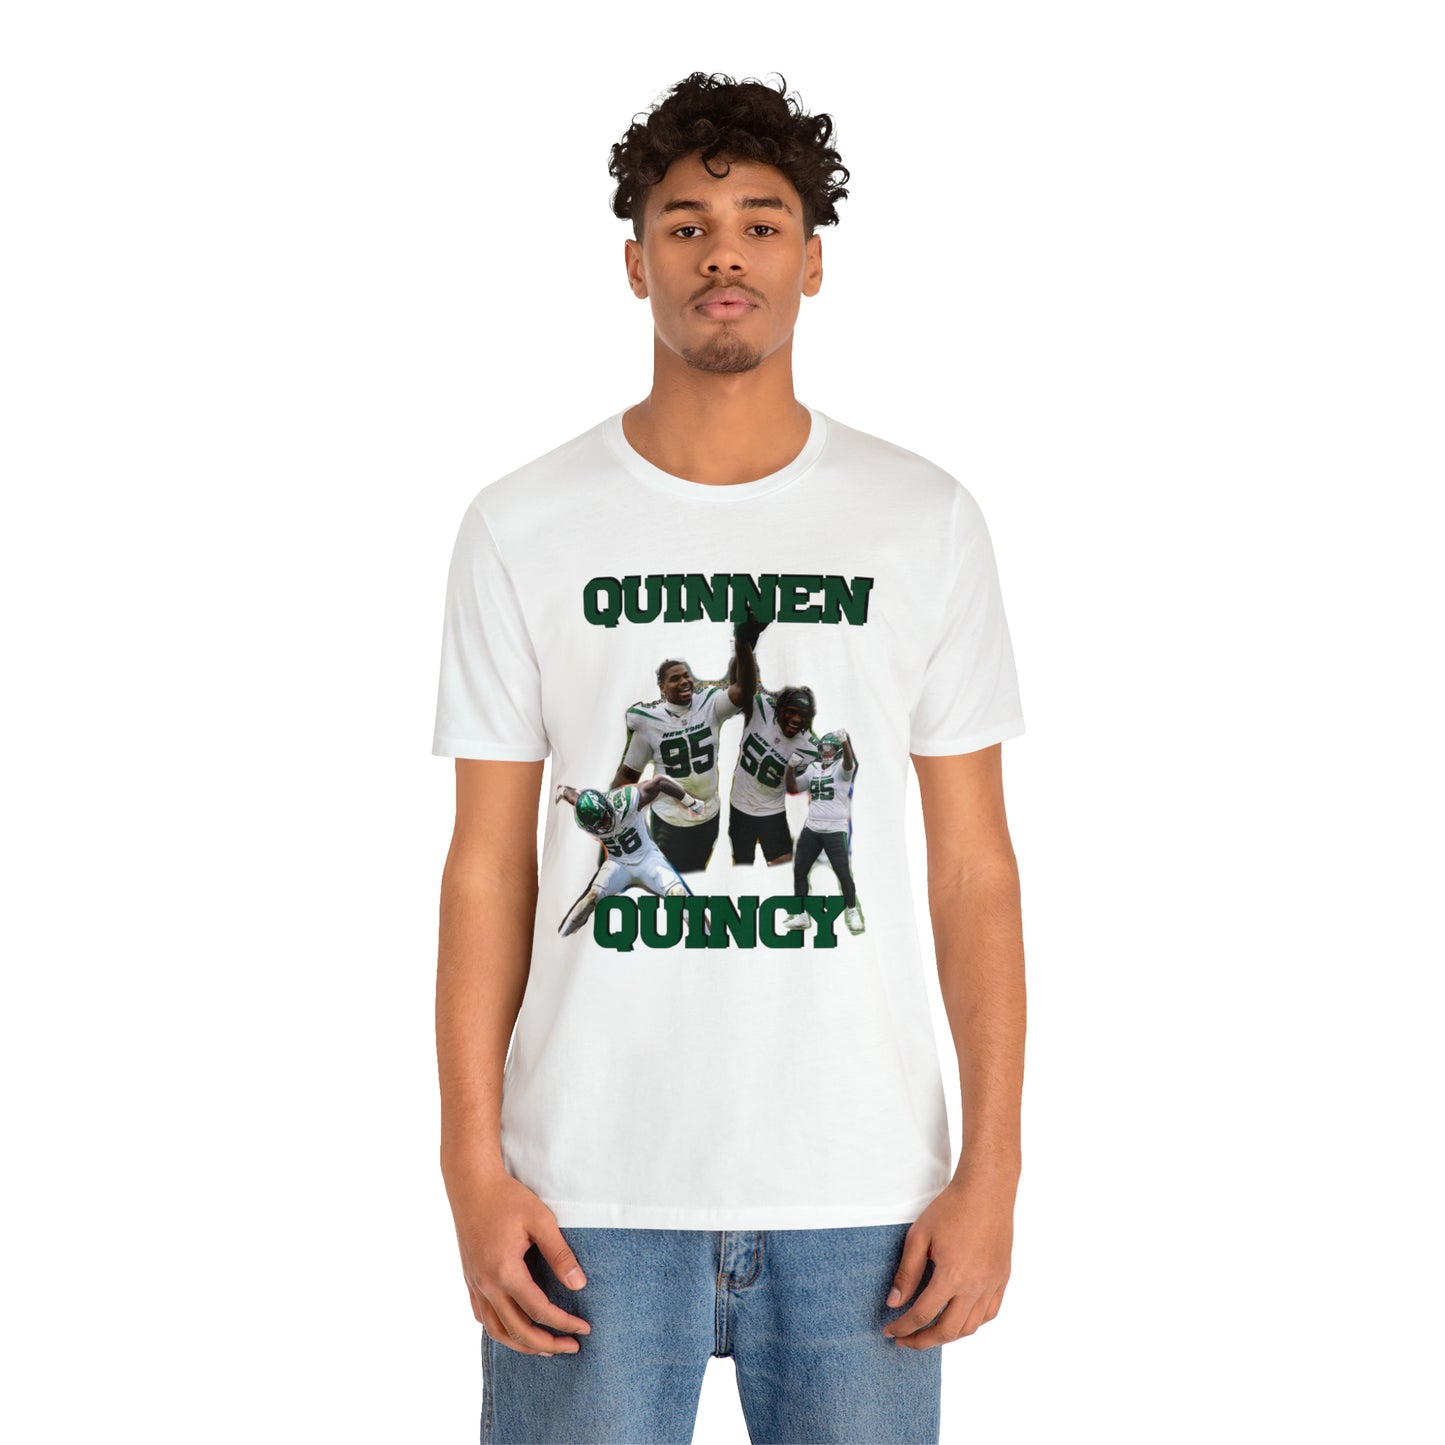 Quinnen and Quincy Williams Shirt